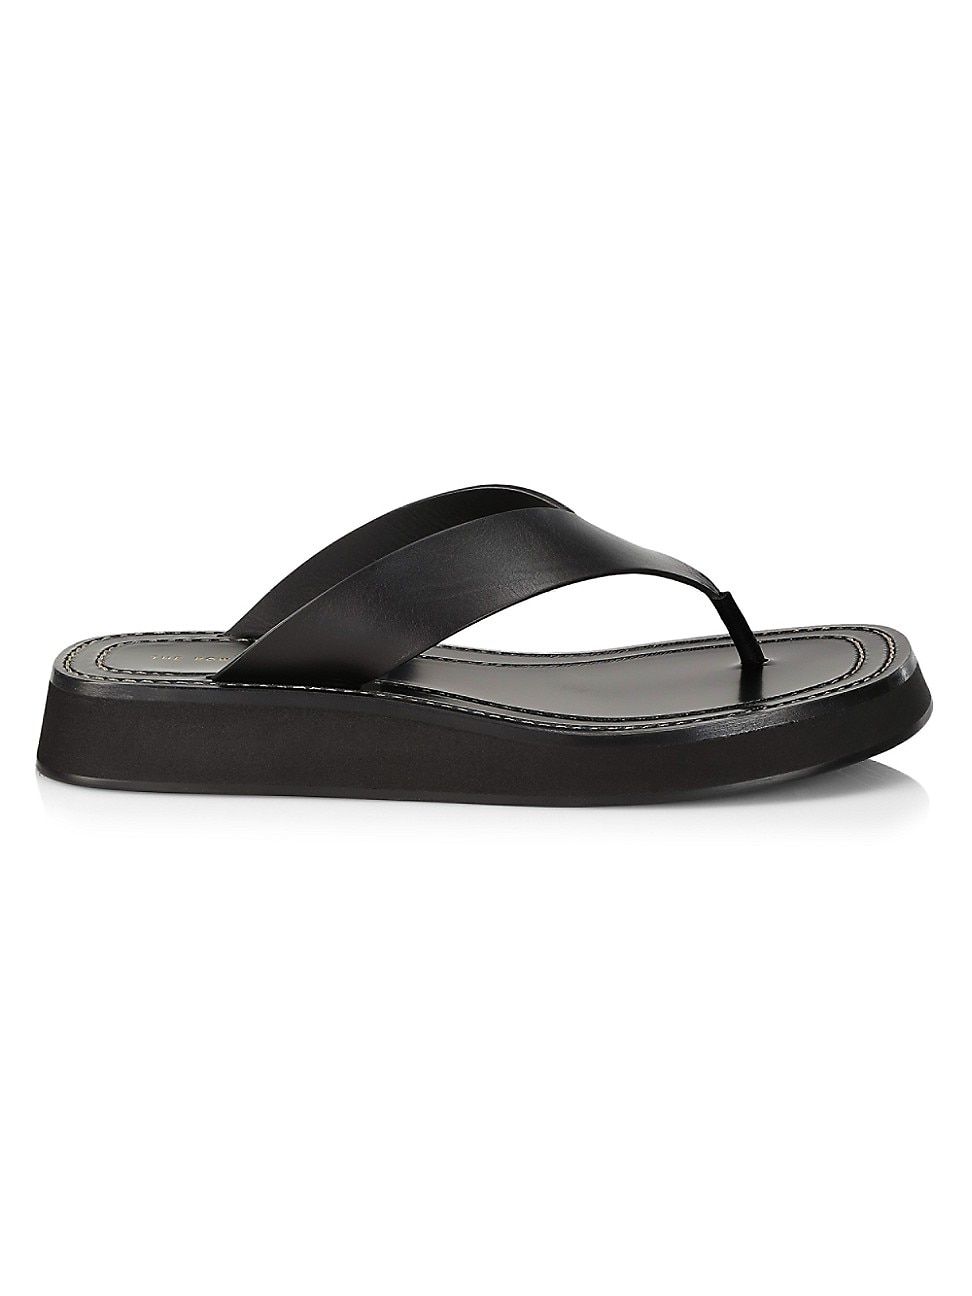 Women's Ginza Leather Thong Sandals - Black - Size 10 | Saks Fifth Avenue